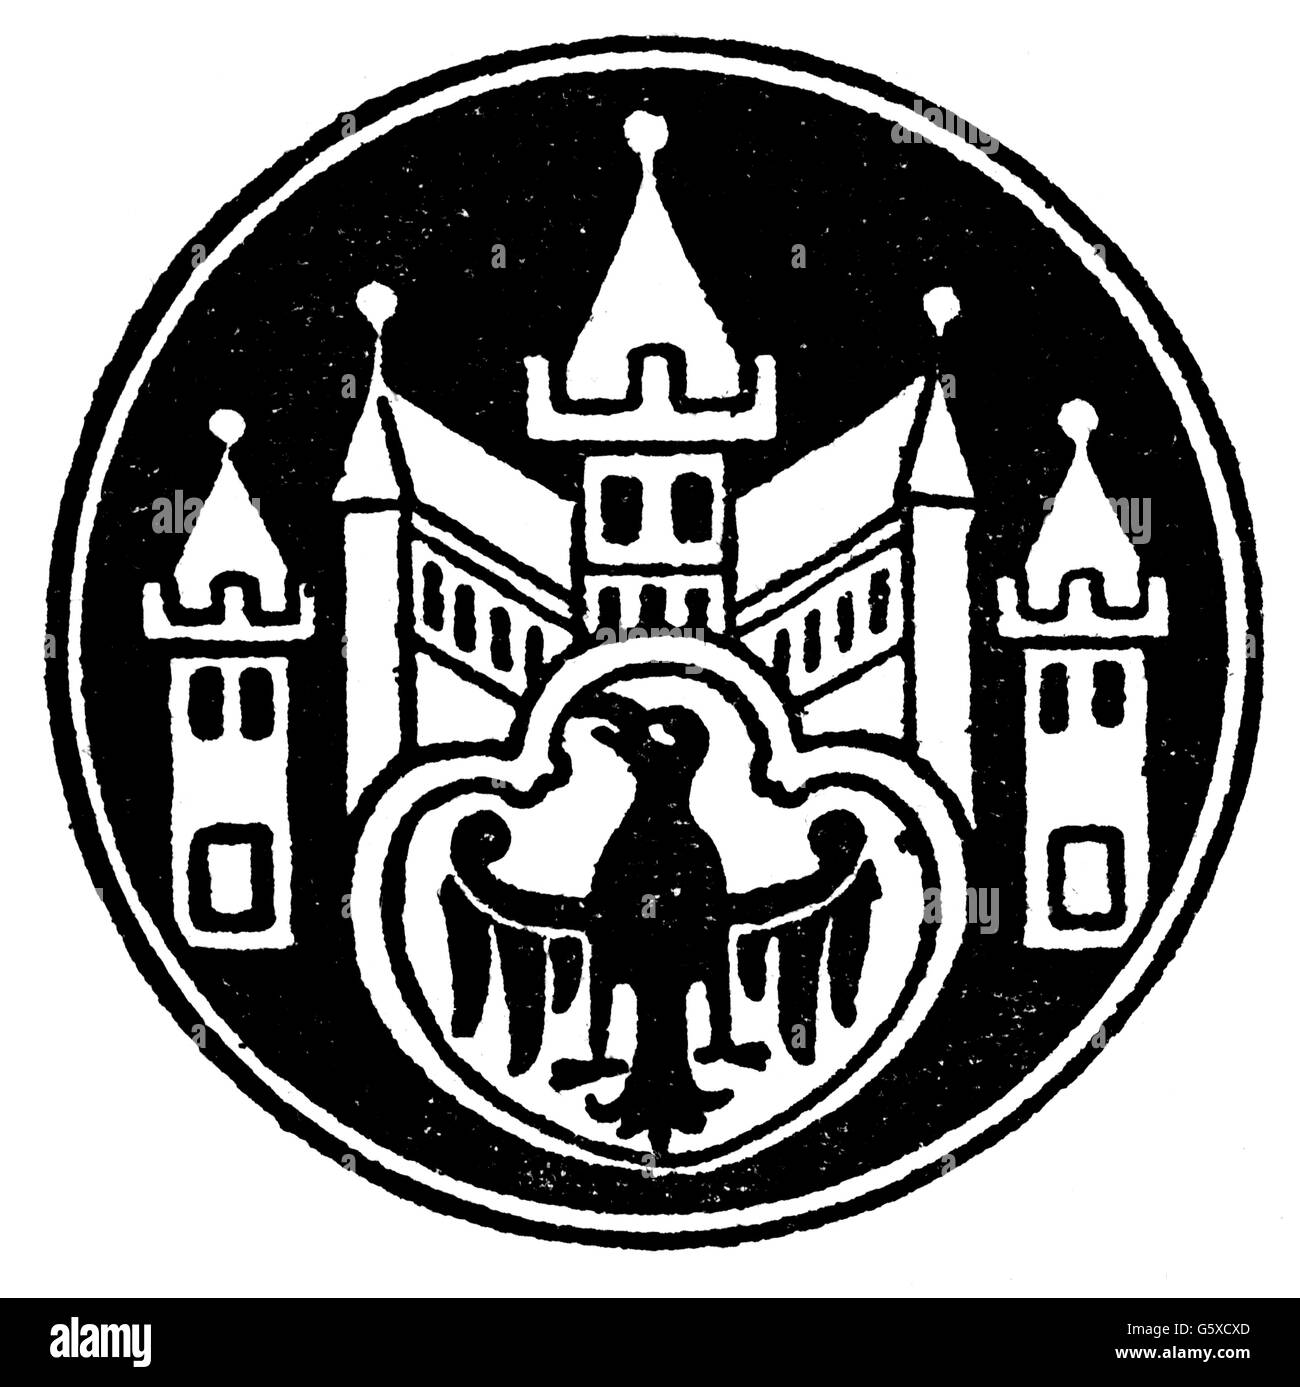 heraldry, coat of arms, Germany, city arms, Berlin, 13th century, wood engraving, late 19th century, middle ages, eagle, Margraviate Brandenburg, Holy Roman Empire, Central Europe, historic, historical, medieval, Additional-Rights-Clearences-Not Available Stock Photo